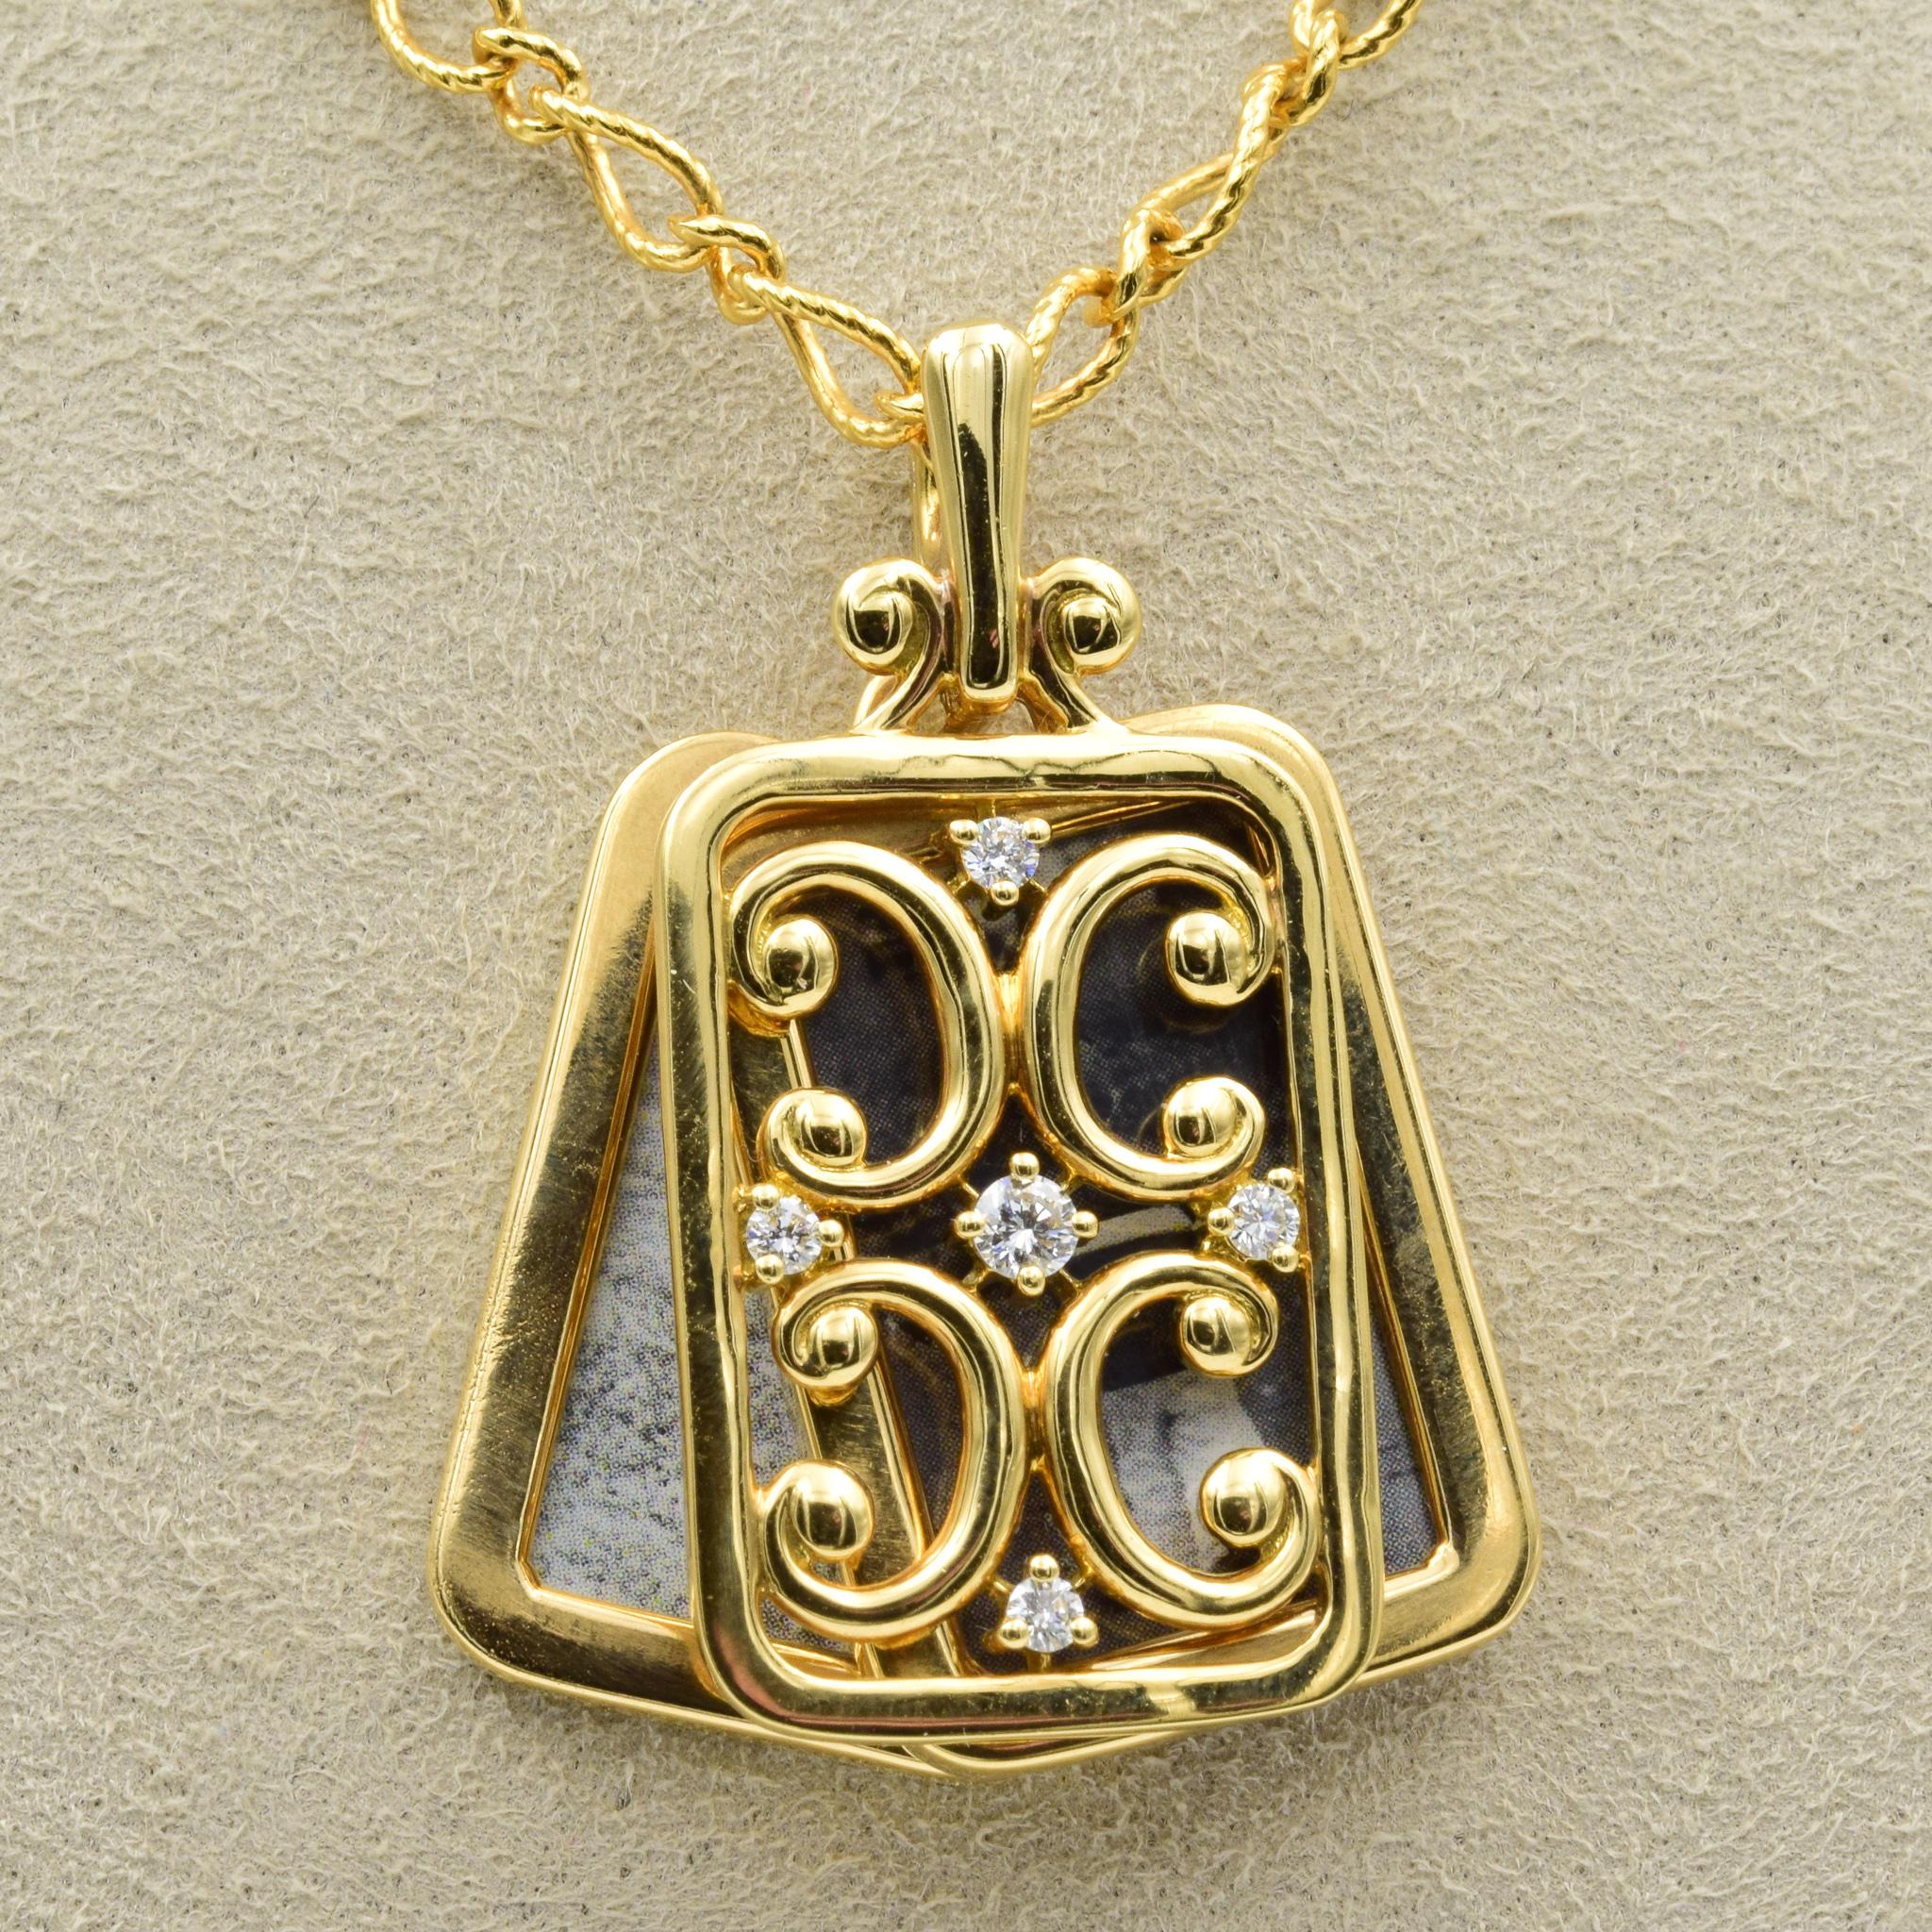 Inspired by a child peeking through an iron gate, this unique locket concept fashioned in solid 18K gold features two single image cases finished in high polish with Monica's signature floral pattern. The cases peek out from behind a scroll gate set